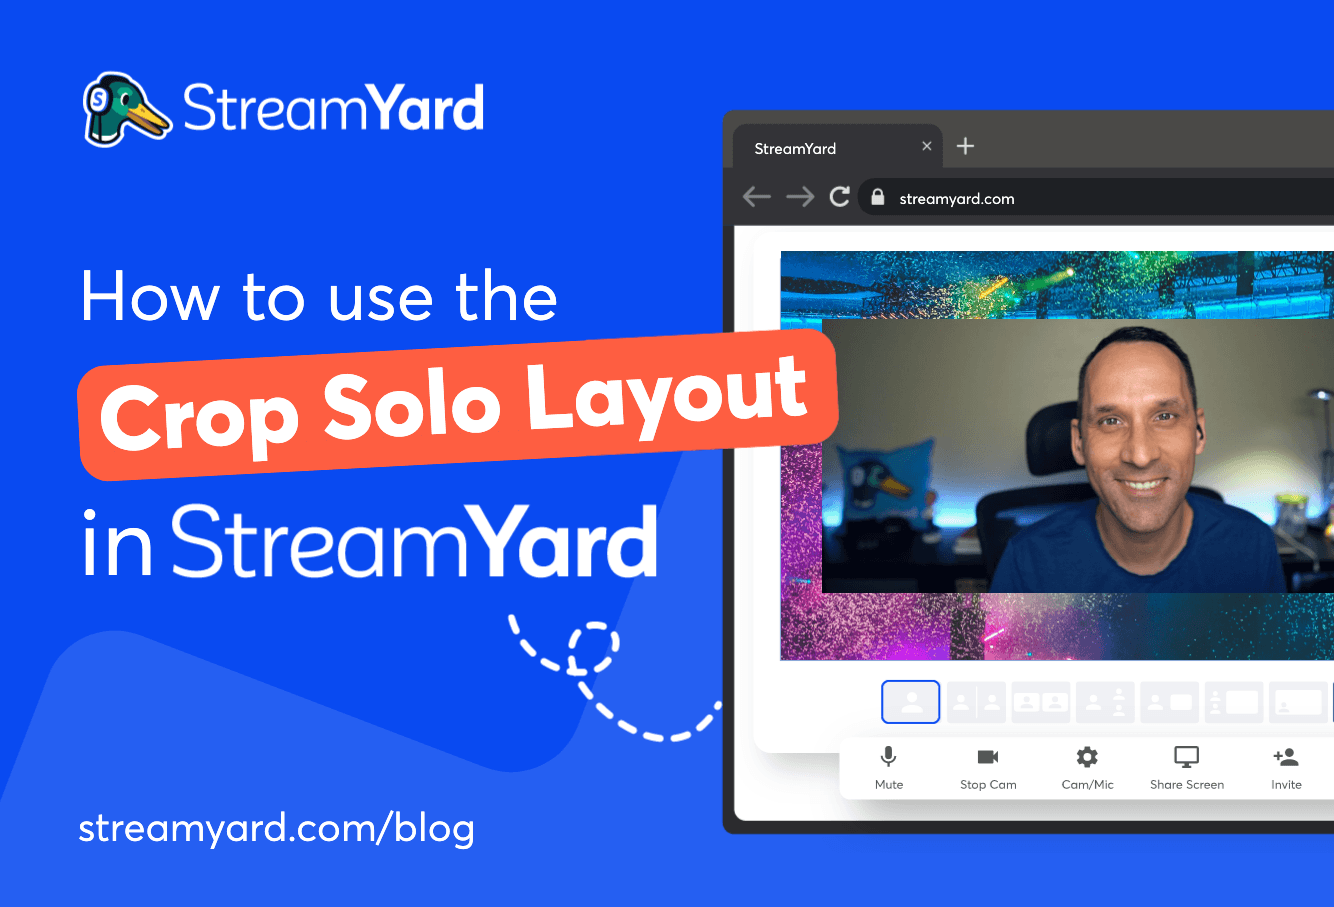 Check out how to use the cropped solo layout in StreamYard and use it for branding as well as enhancing your live video’s aesthetics.